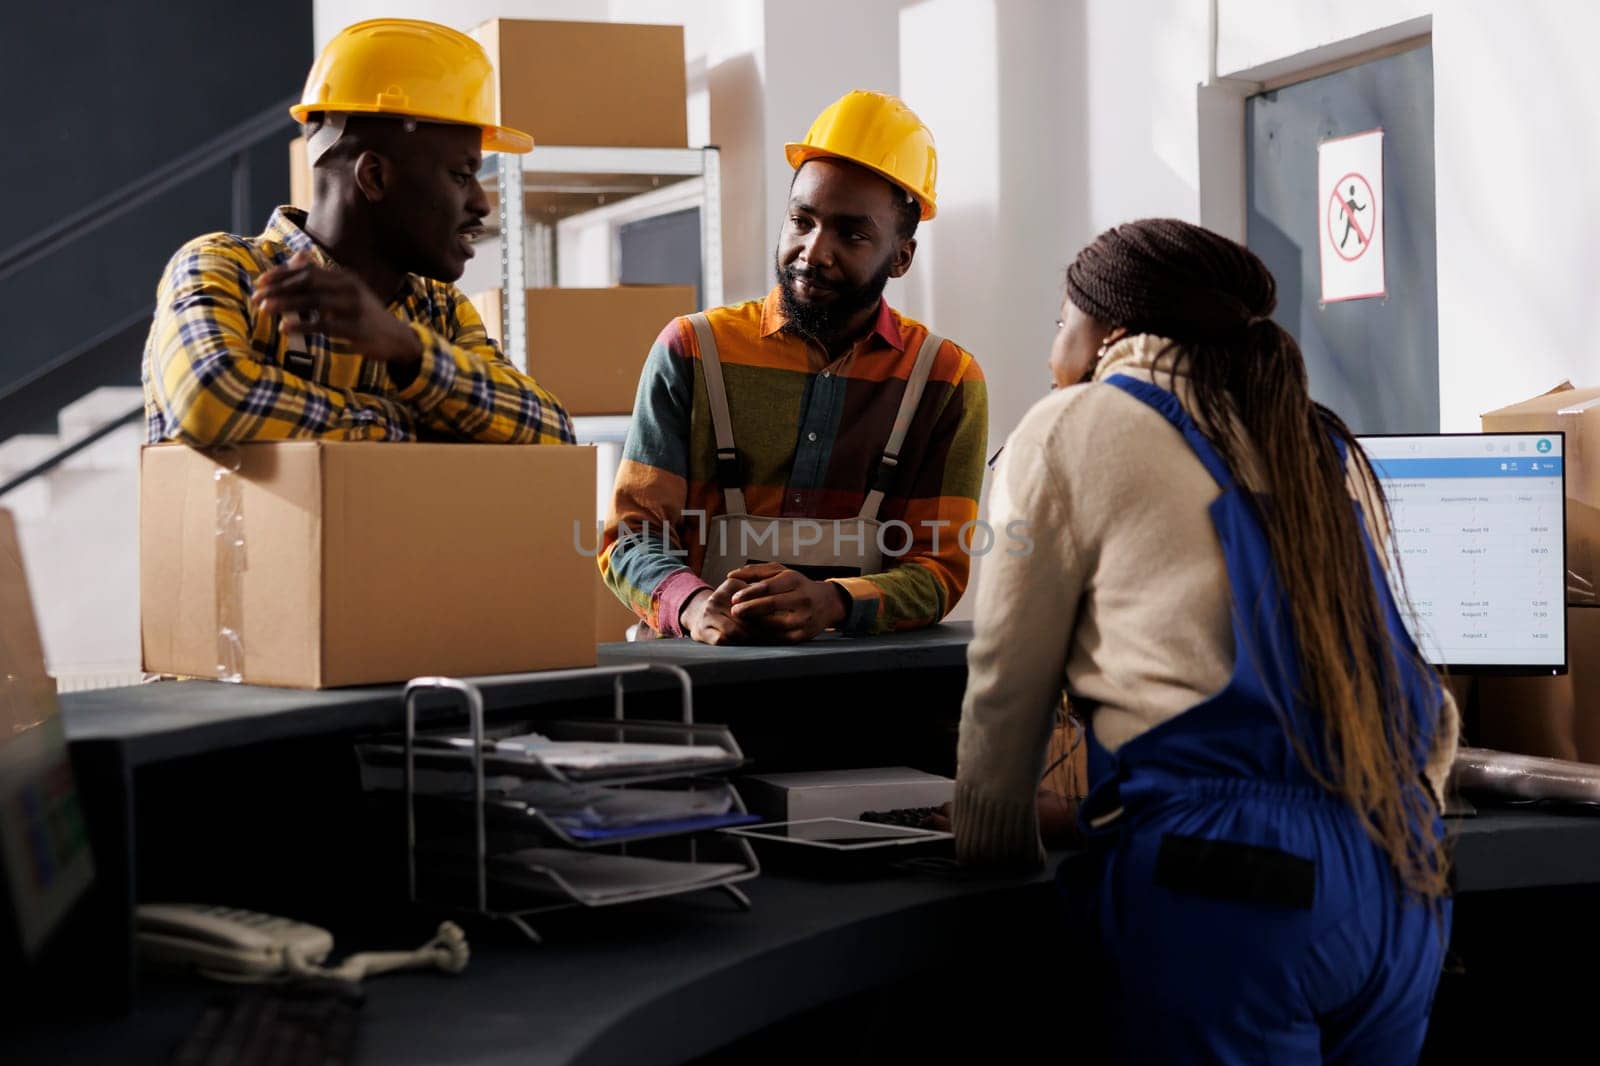 Warehouse workers holding parcel at reception, discussing package transportation by DCStudio